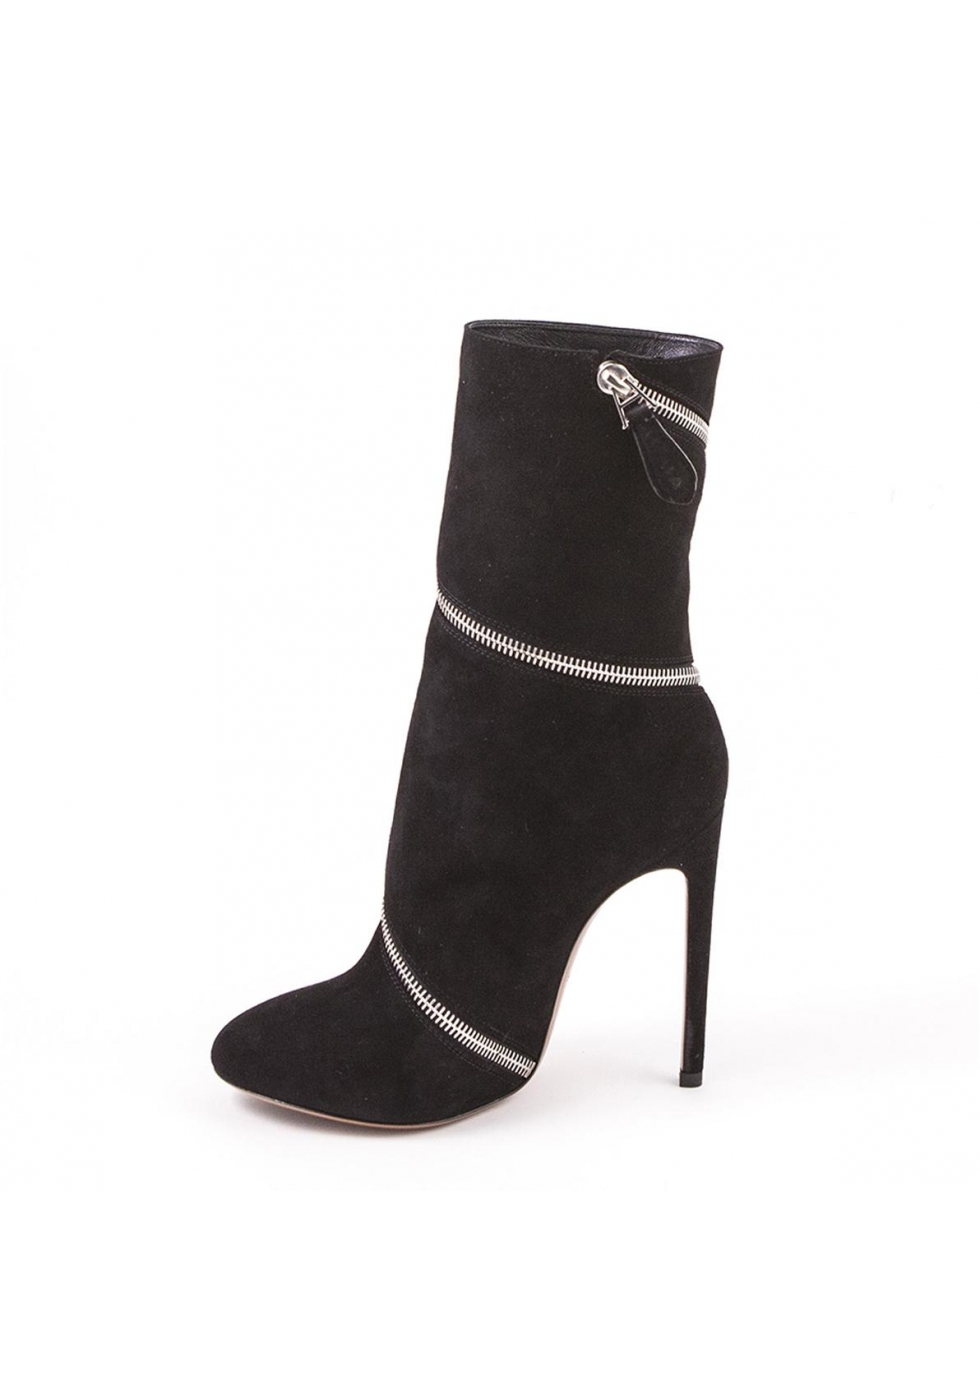 Alaïa midcalf zipped booties in black suede leather - Italian Boutique